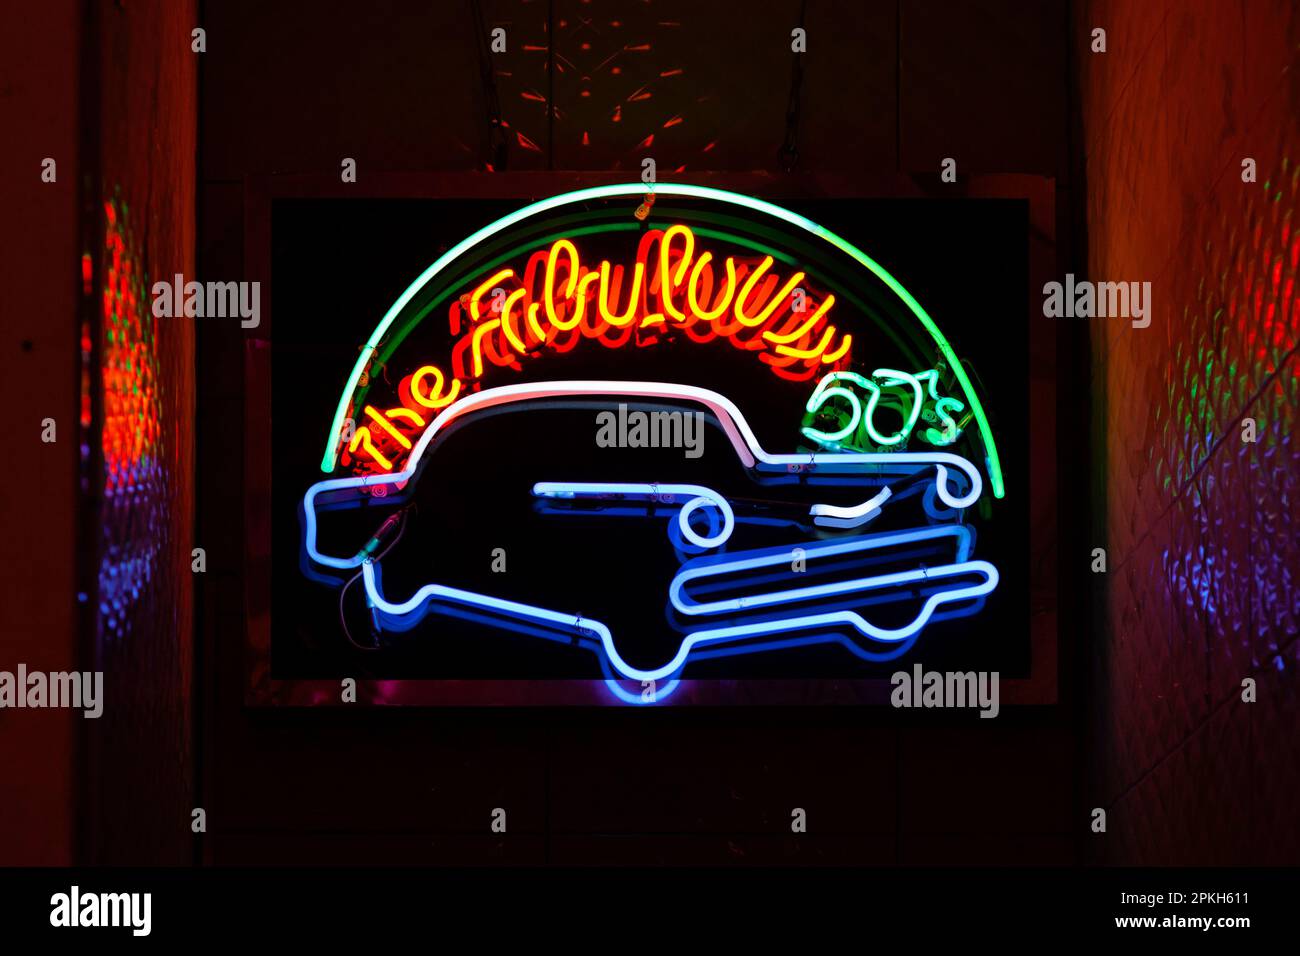 Neon light on a brick wall saying 'The fabulous 50's' above a retro car. Stock Photo